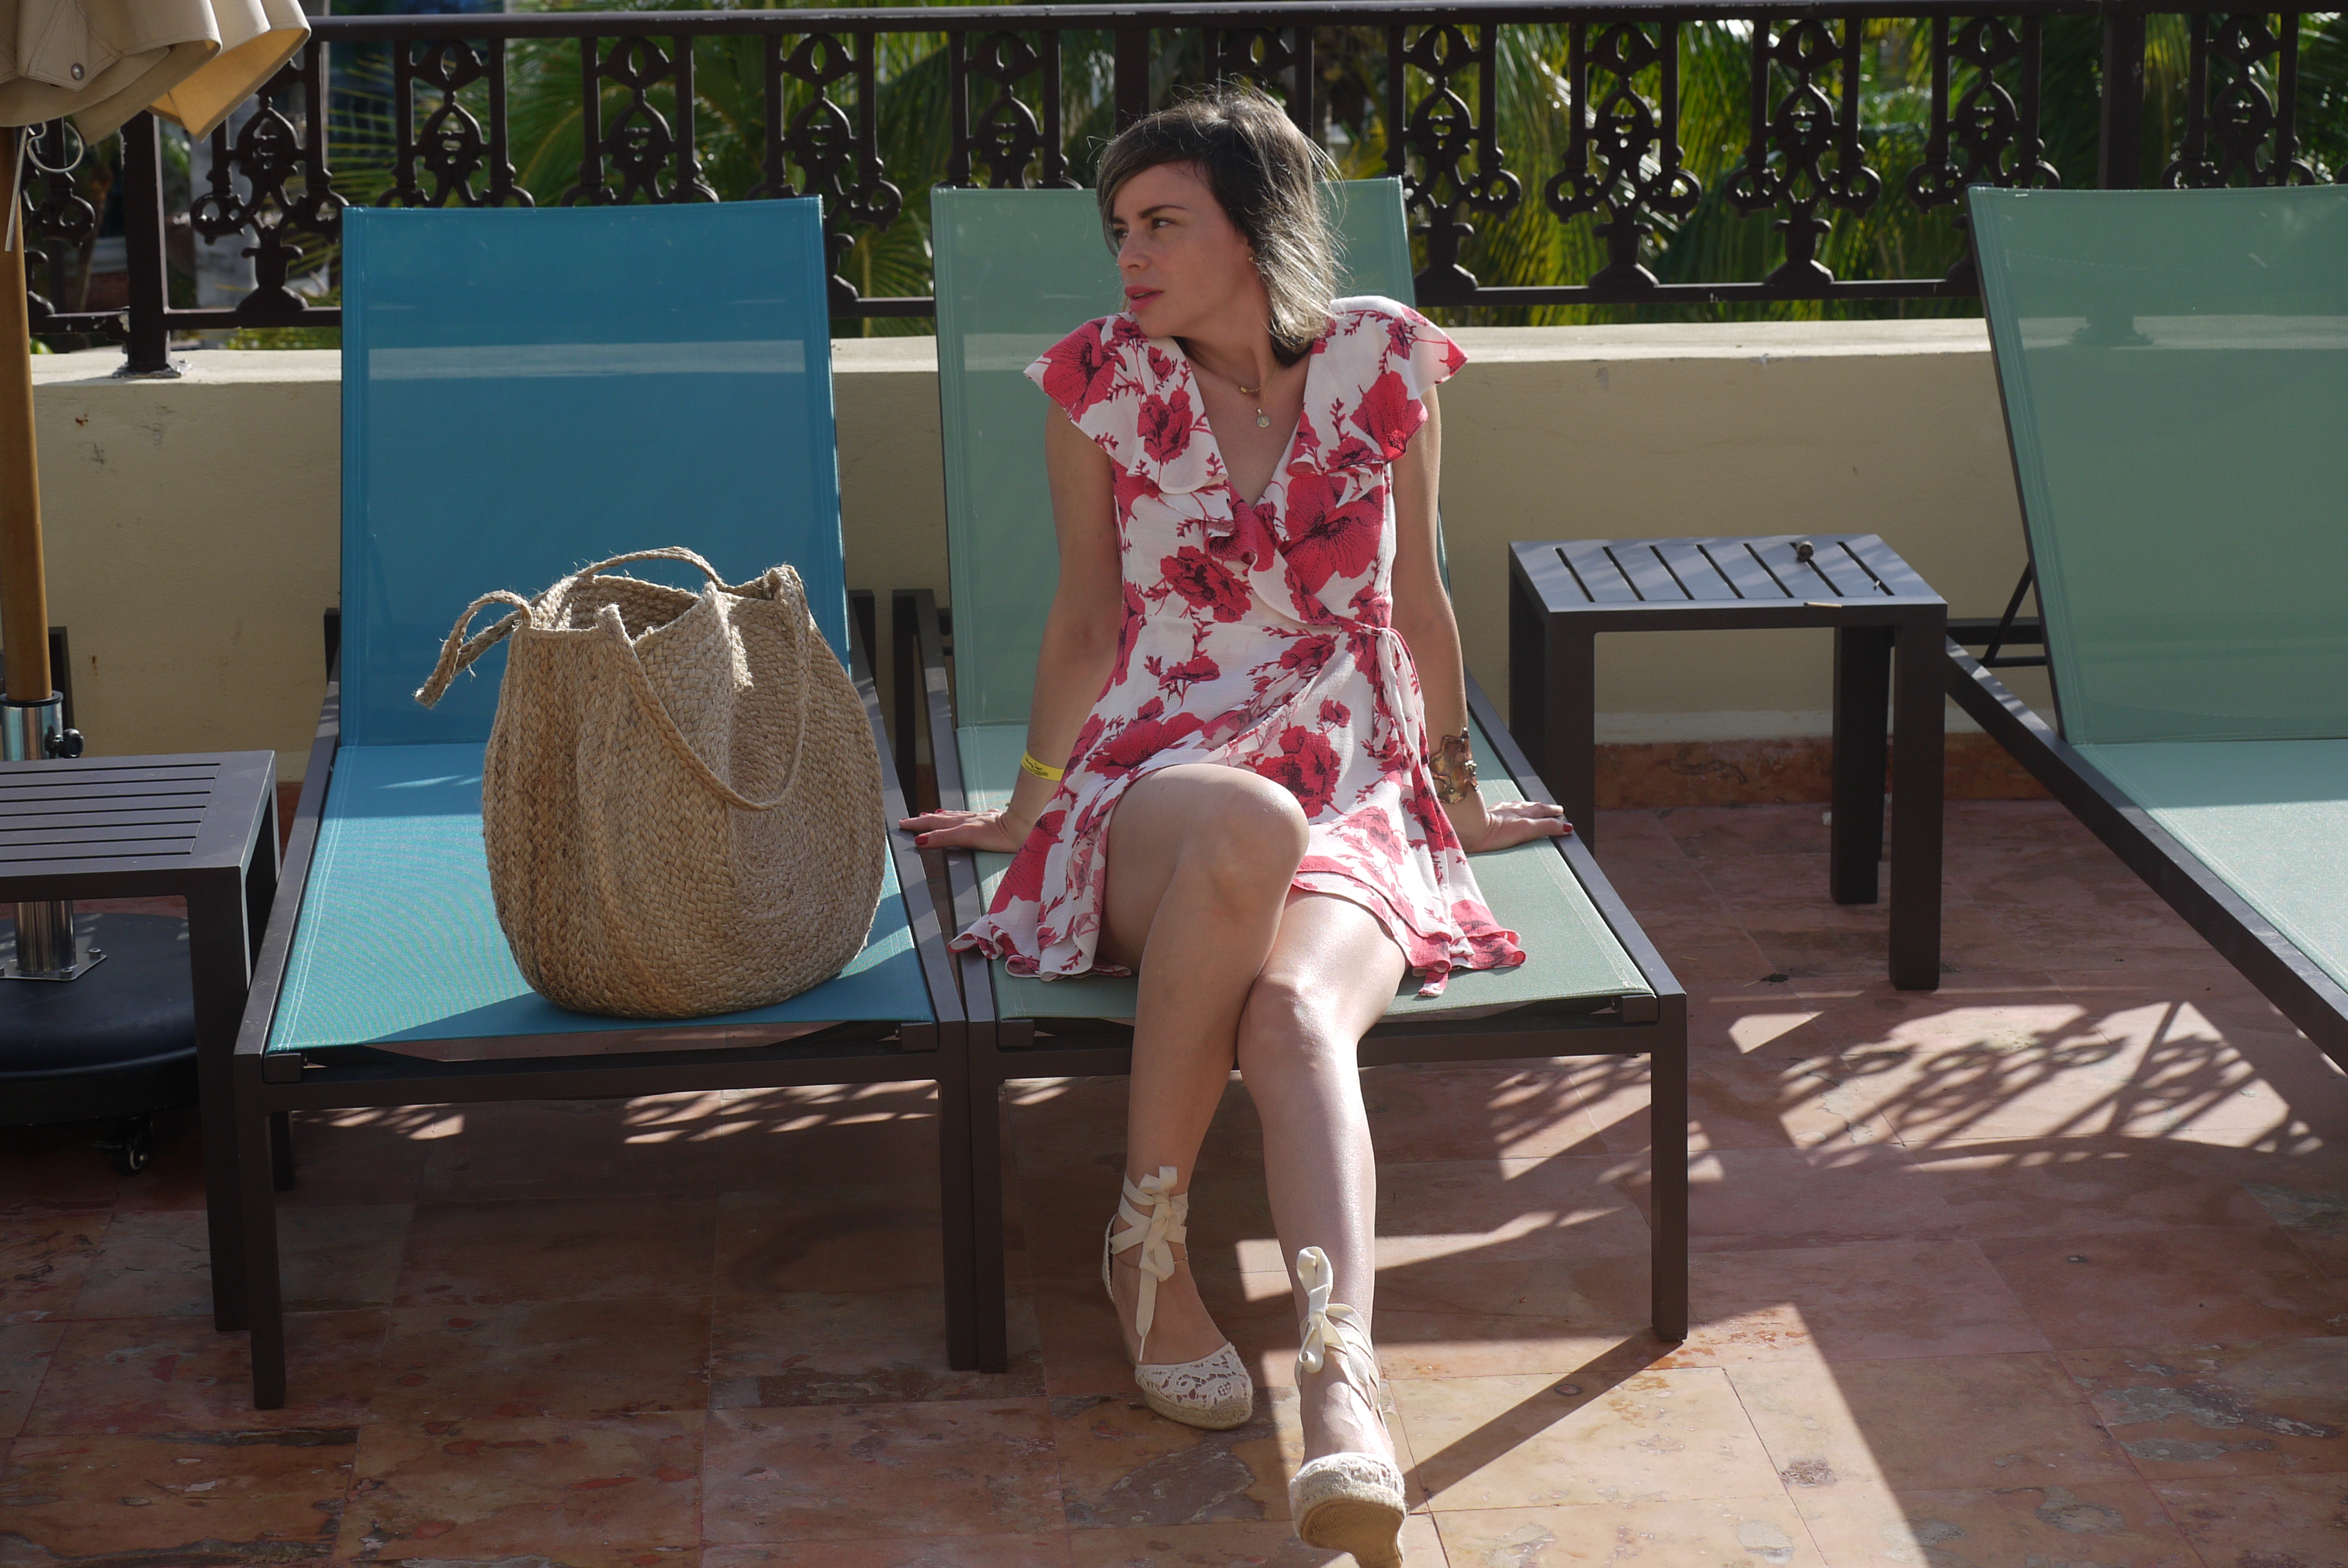 Alba Marina Otero fashion blogger from Mylovelypeople blog shares with you how to wear a wrap flower dress not only for summer but fall season too